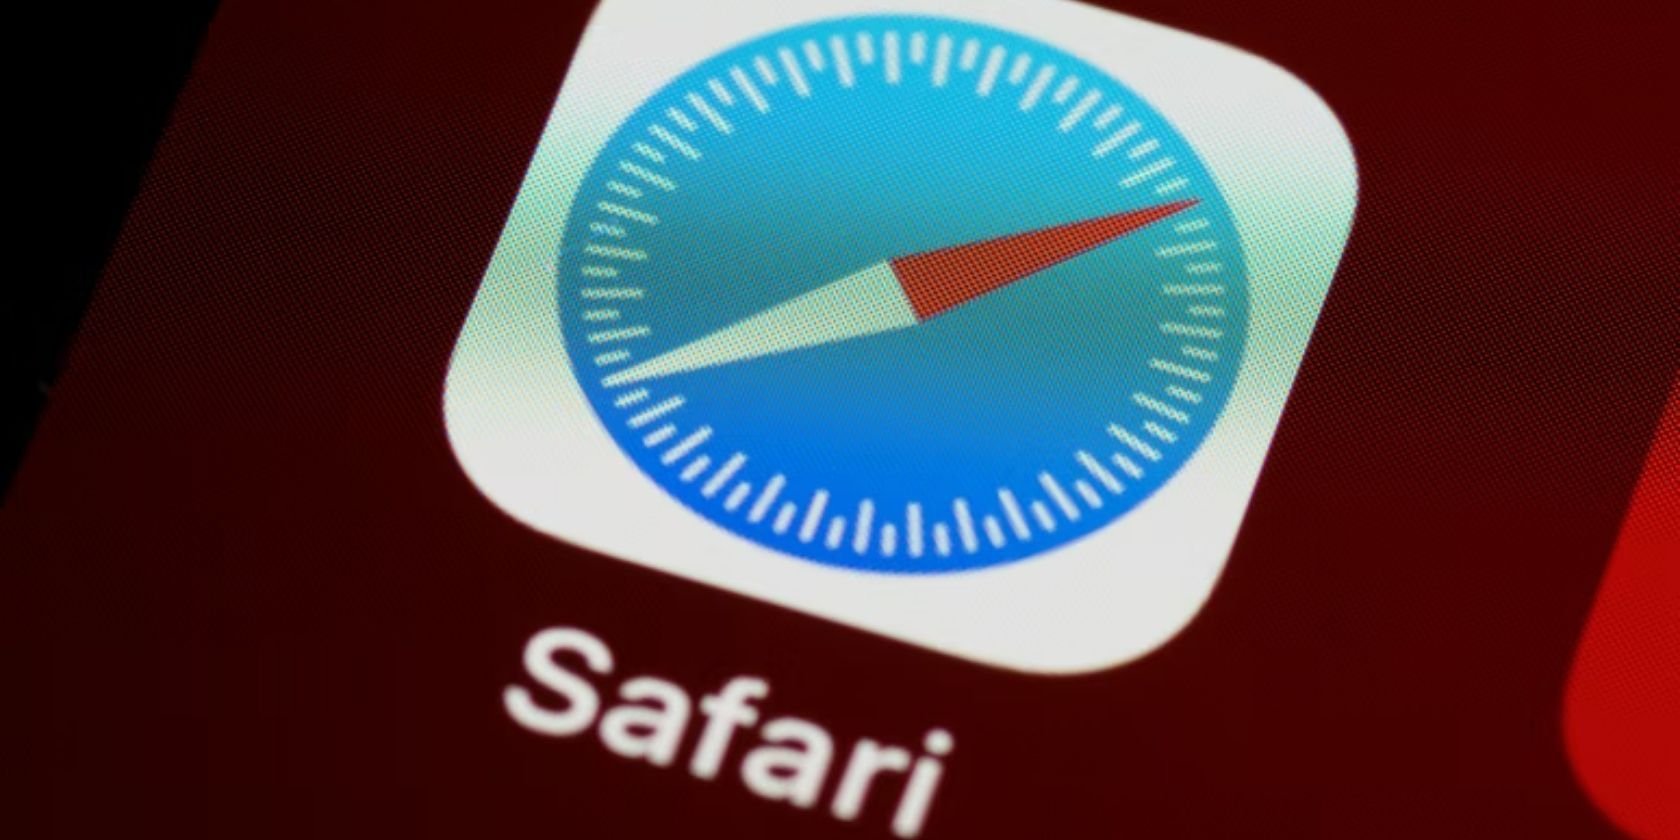 Safari: A Beginner’s Guide for iPhone or iPad Users